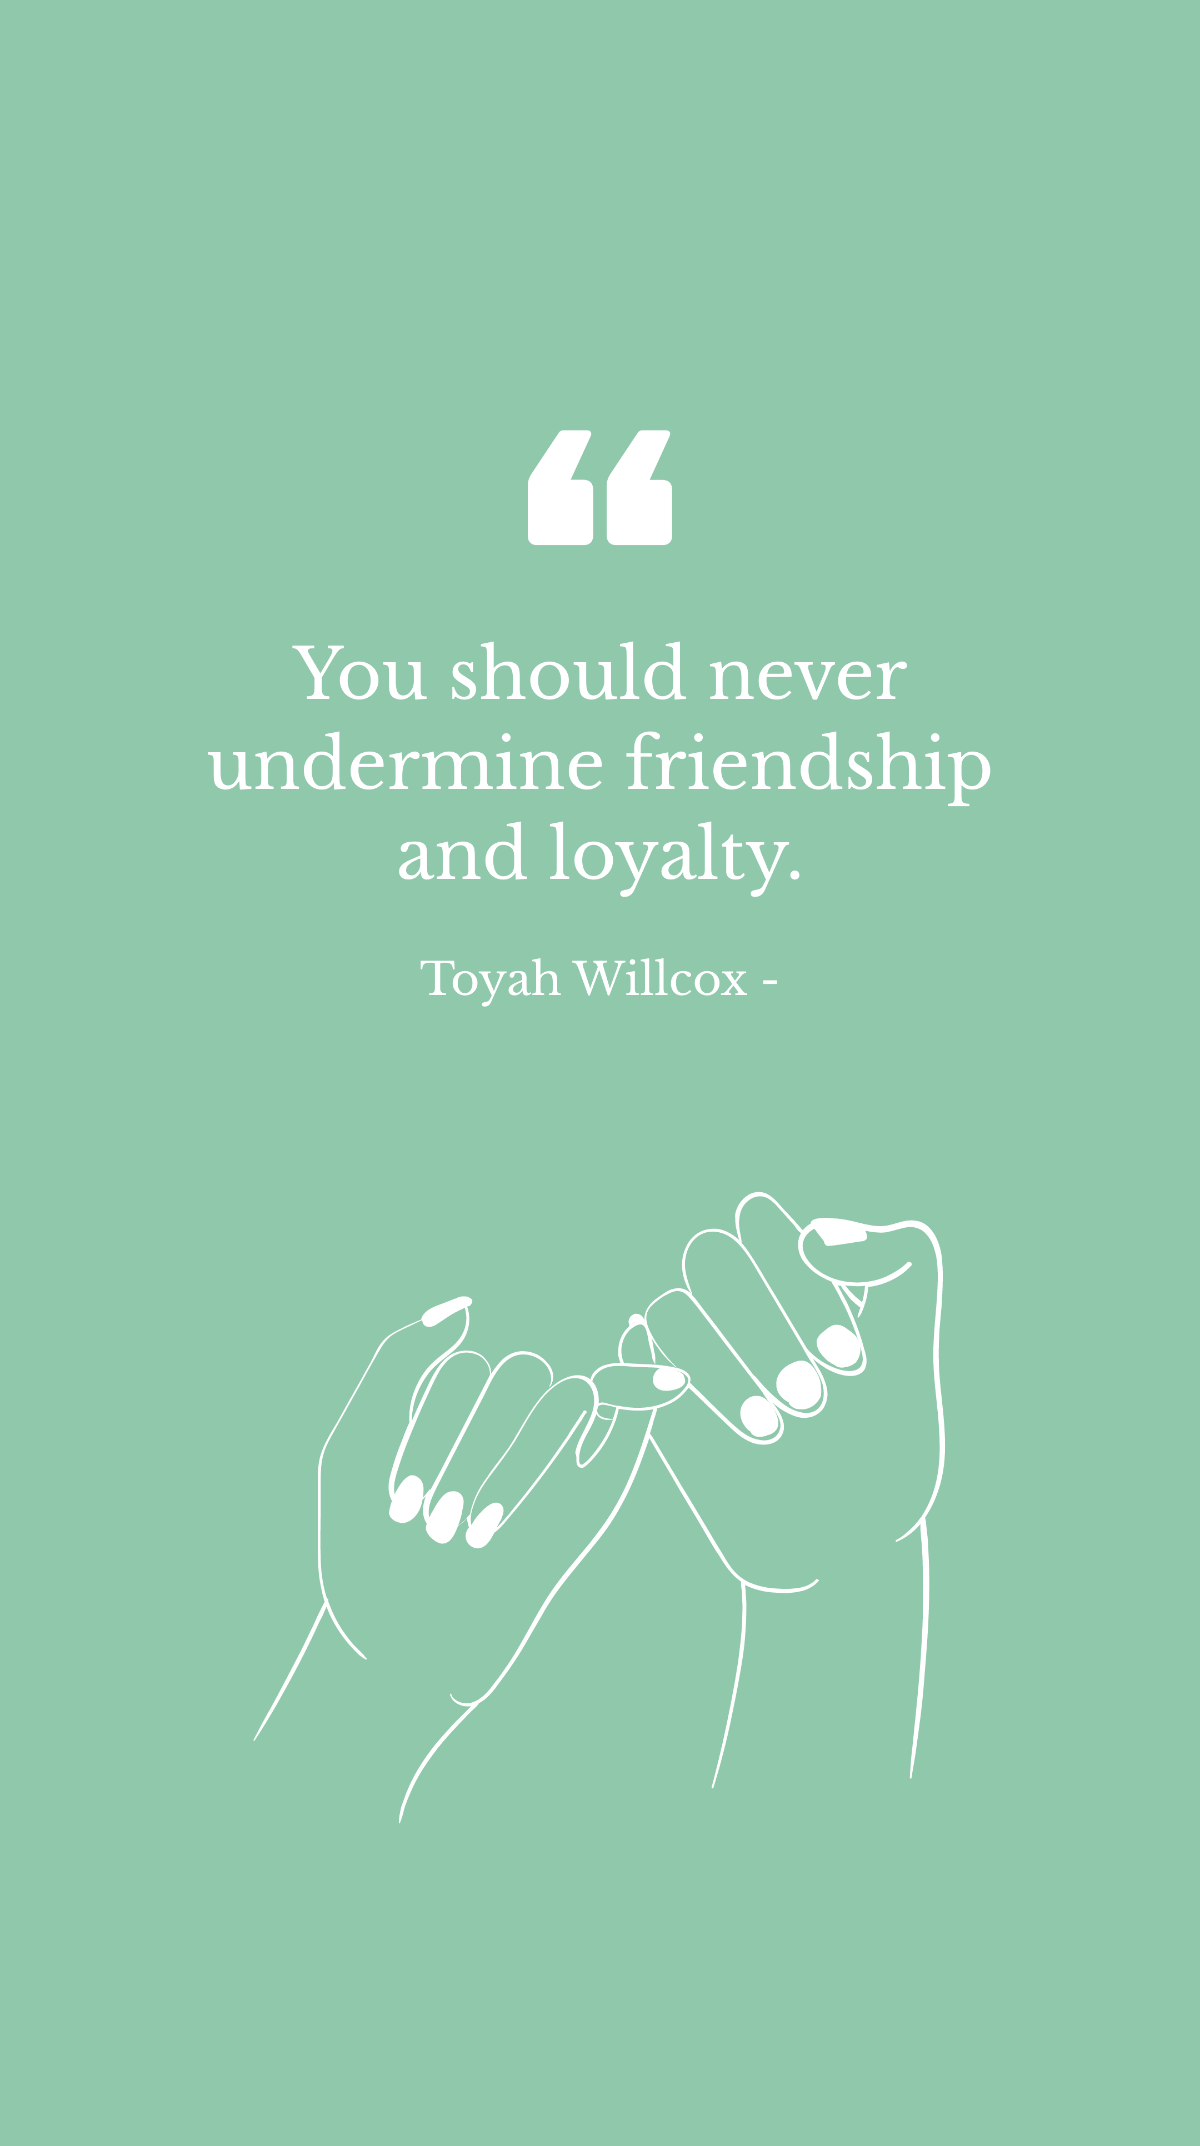 Toyah Willcox - You should never undermine friendship and loyalty. Template